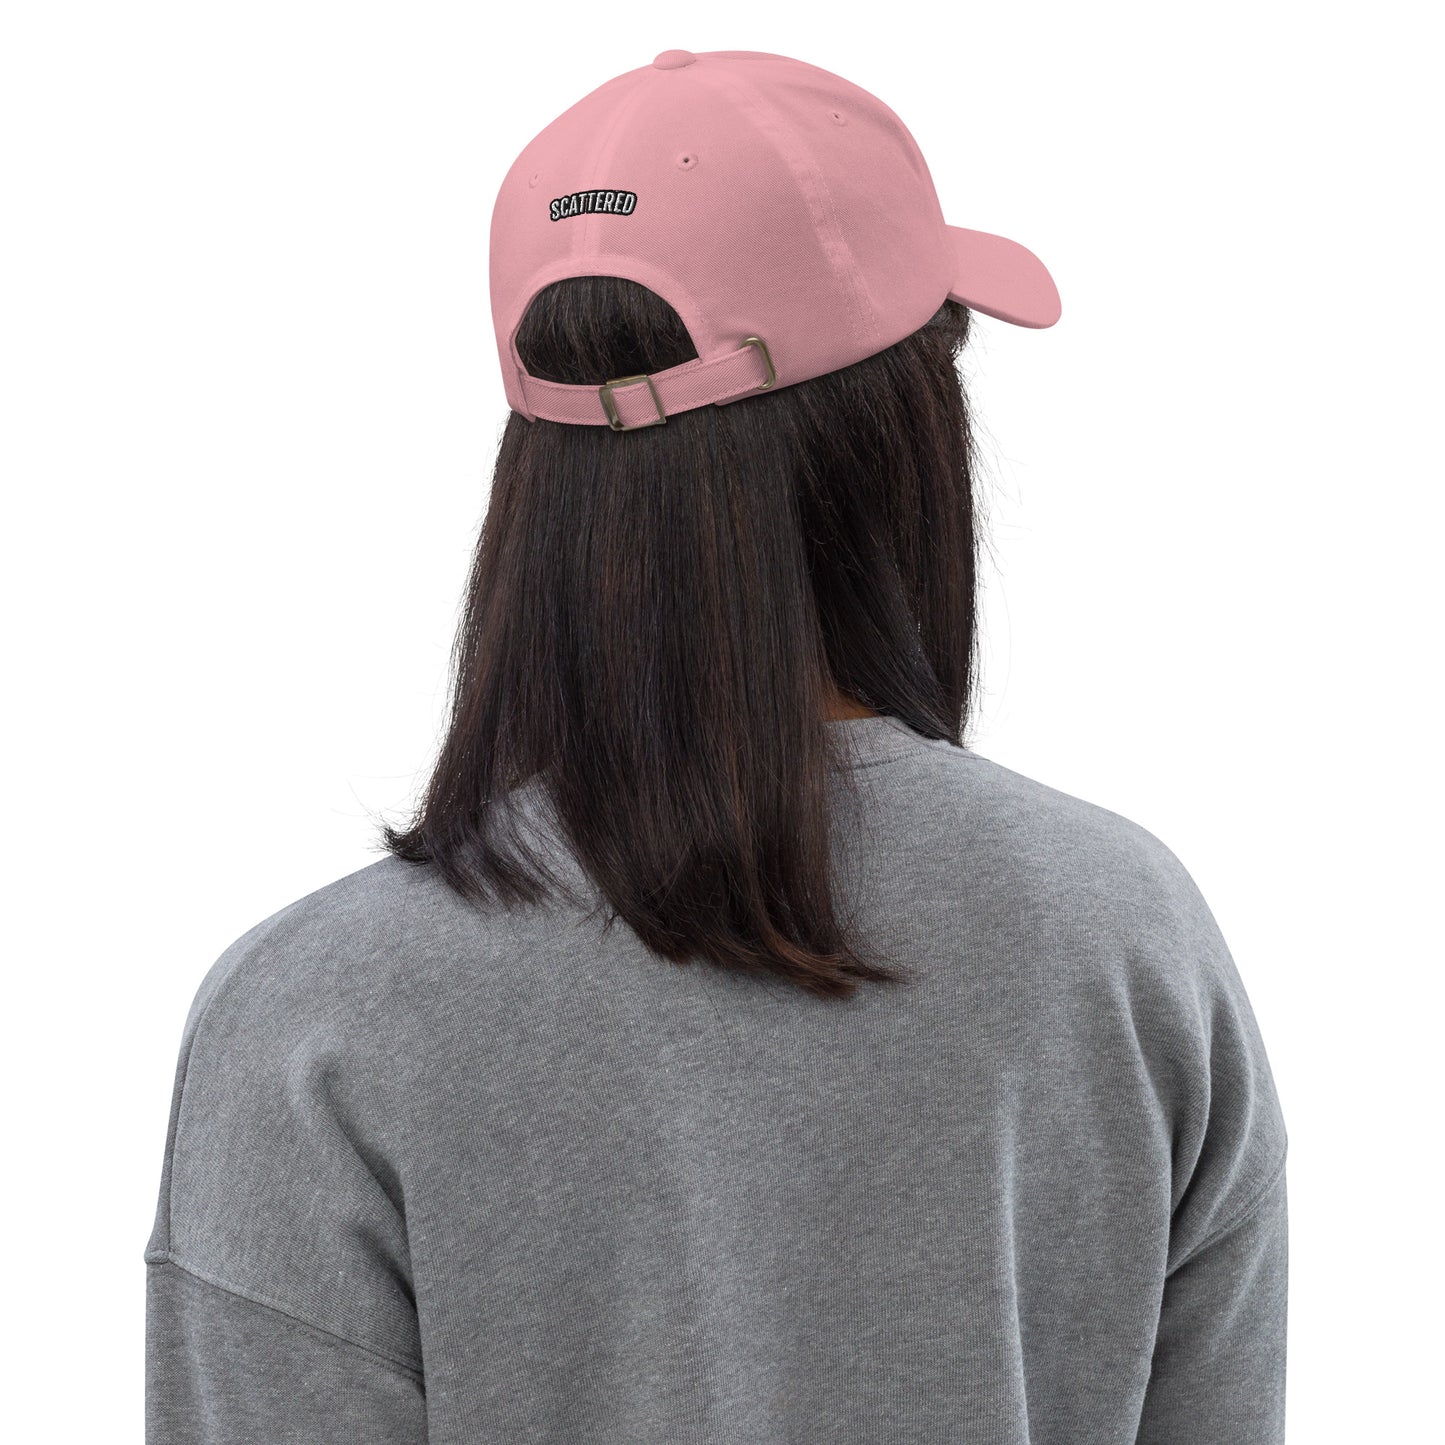 New York Apple Logo Embroidered Pink Dad Hat Scattered Streetwear